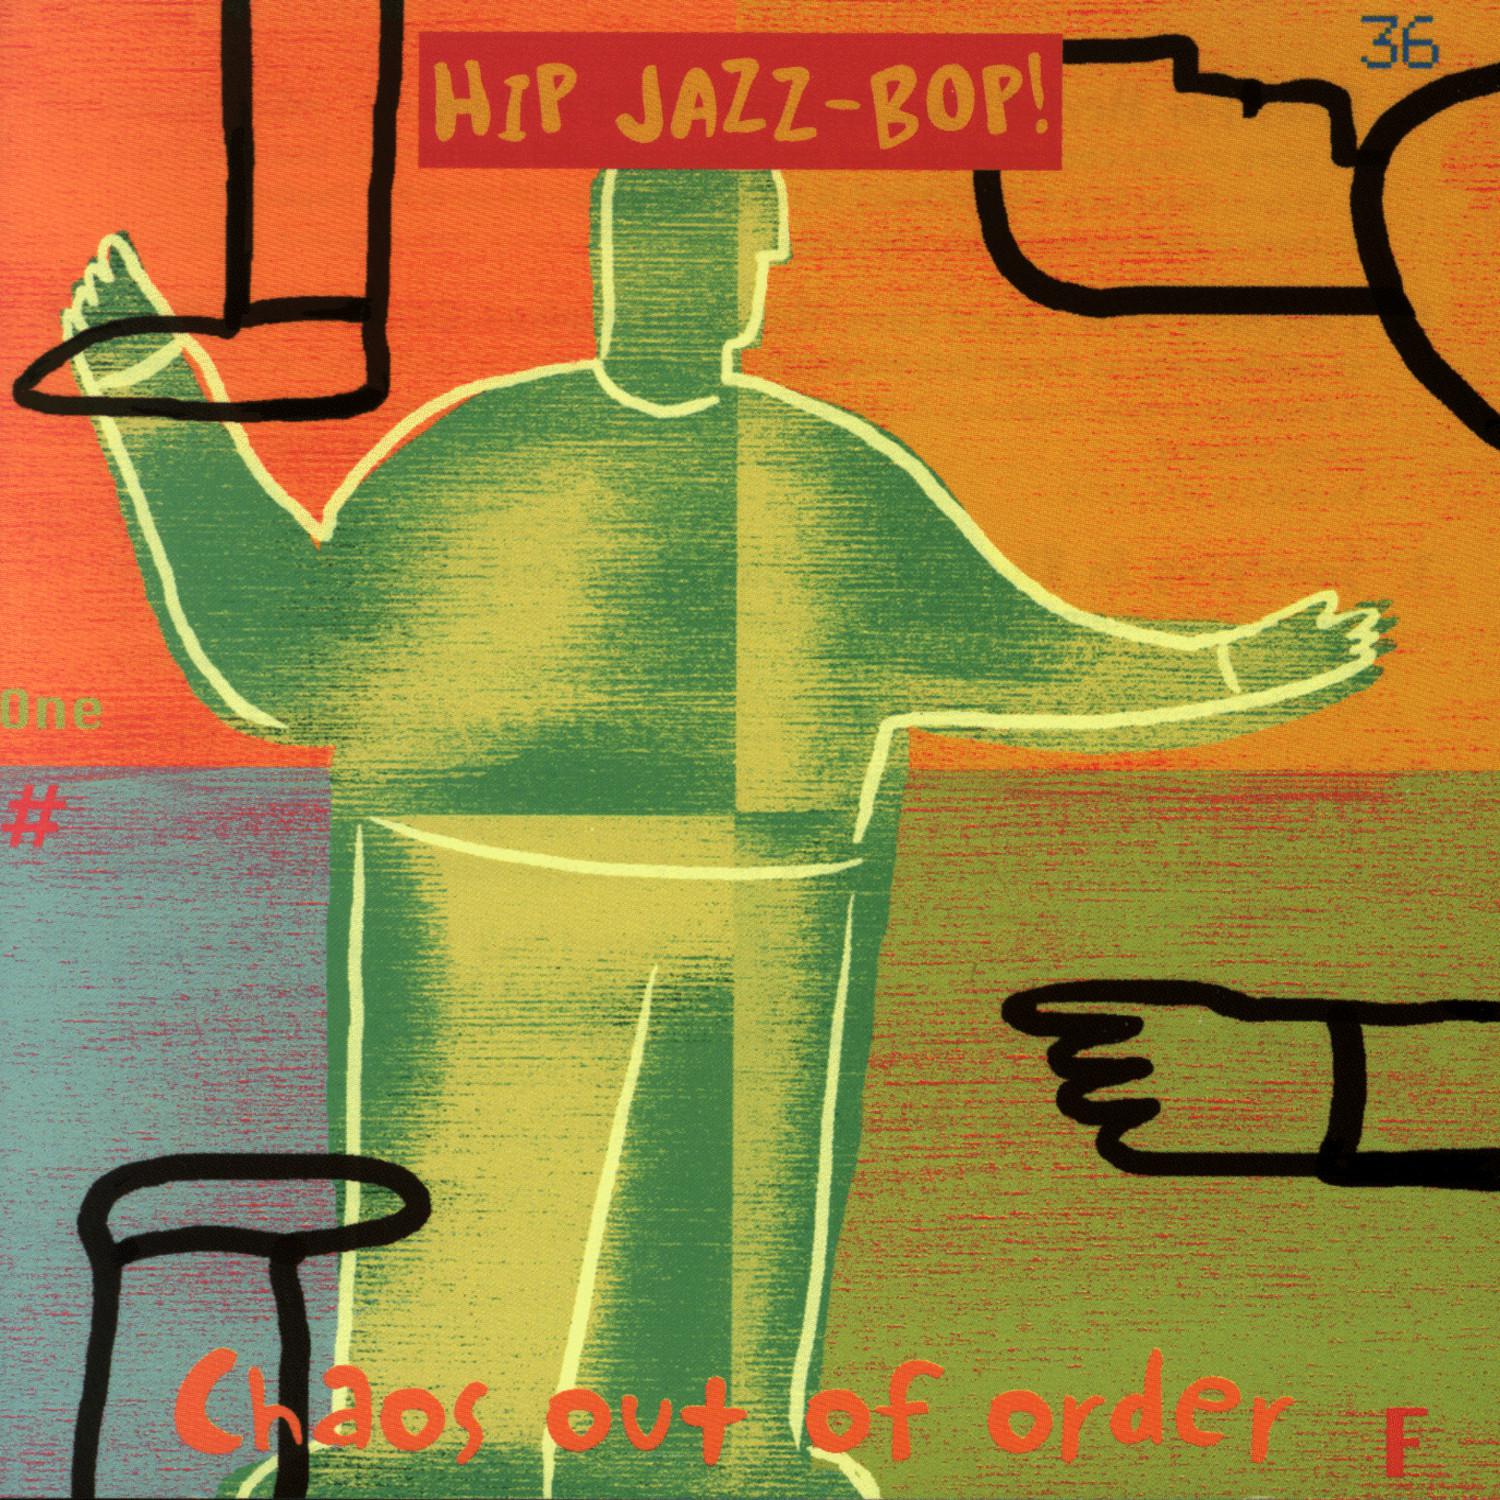 HIP JAZZ BOP - Chaos Out Of Order: Jazz Essentials By Jazz Greats